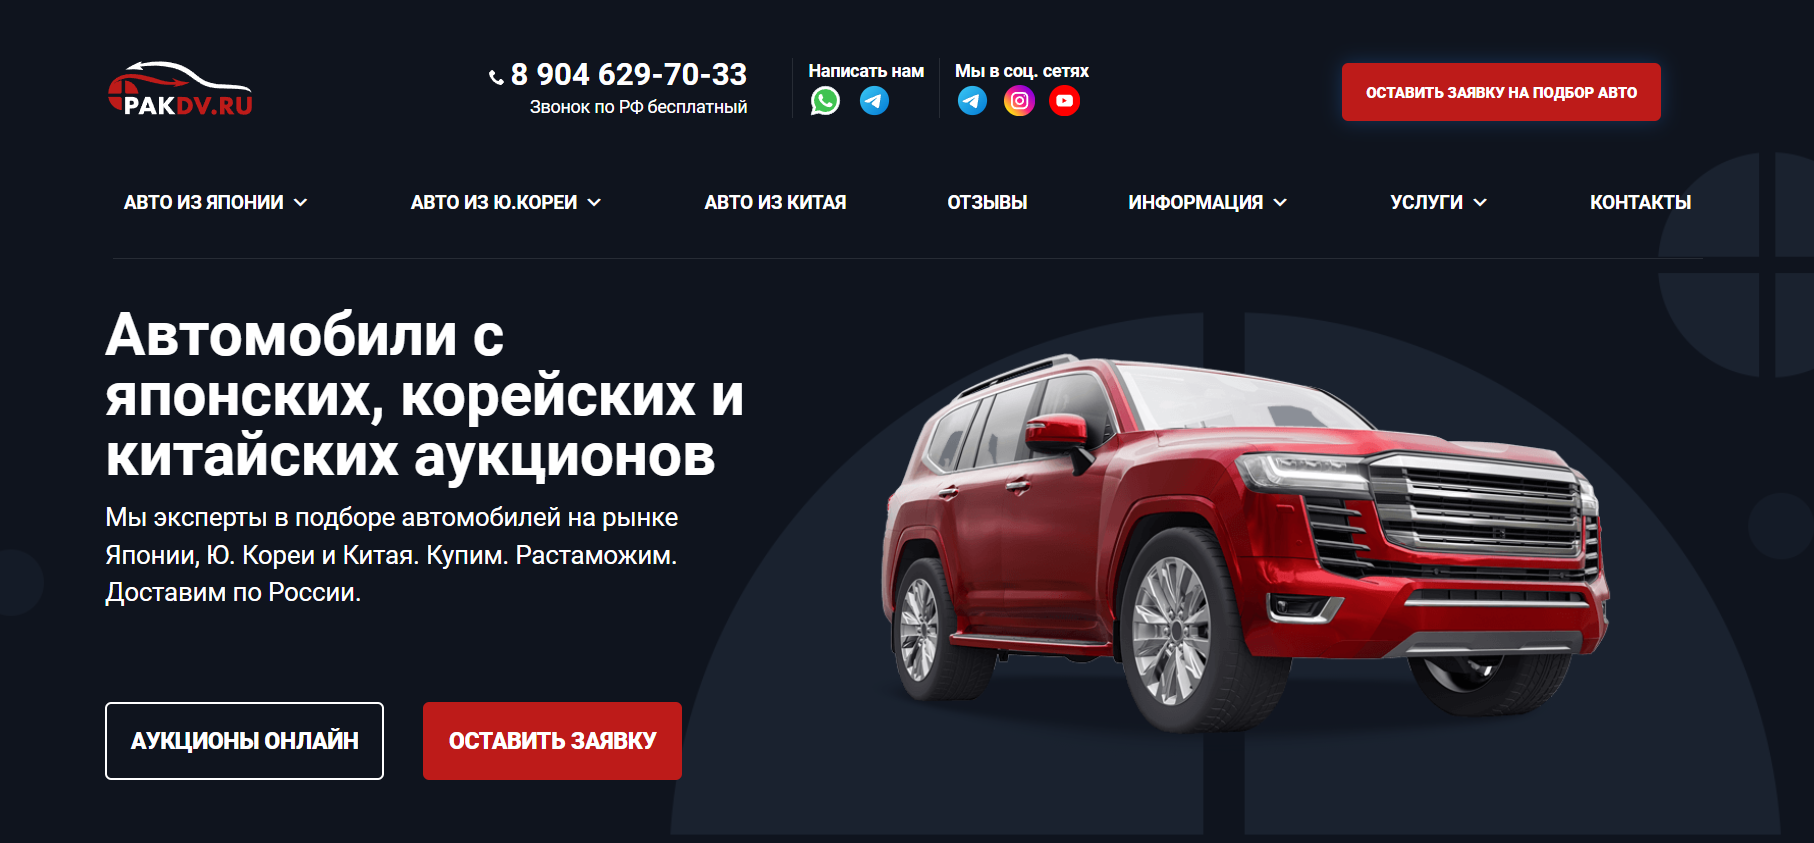 PAKDV.RU reviews. PAKDV.RU: How to avoid fraud and serious problems when buying a car at auction.